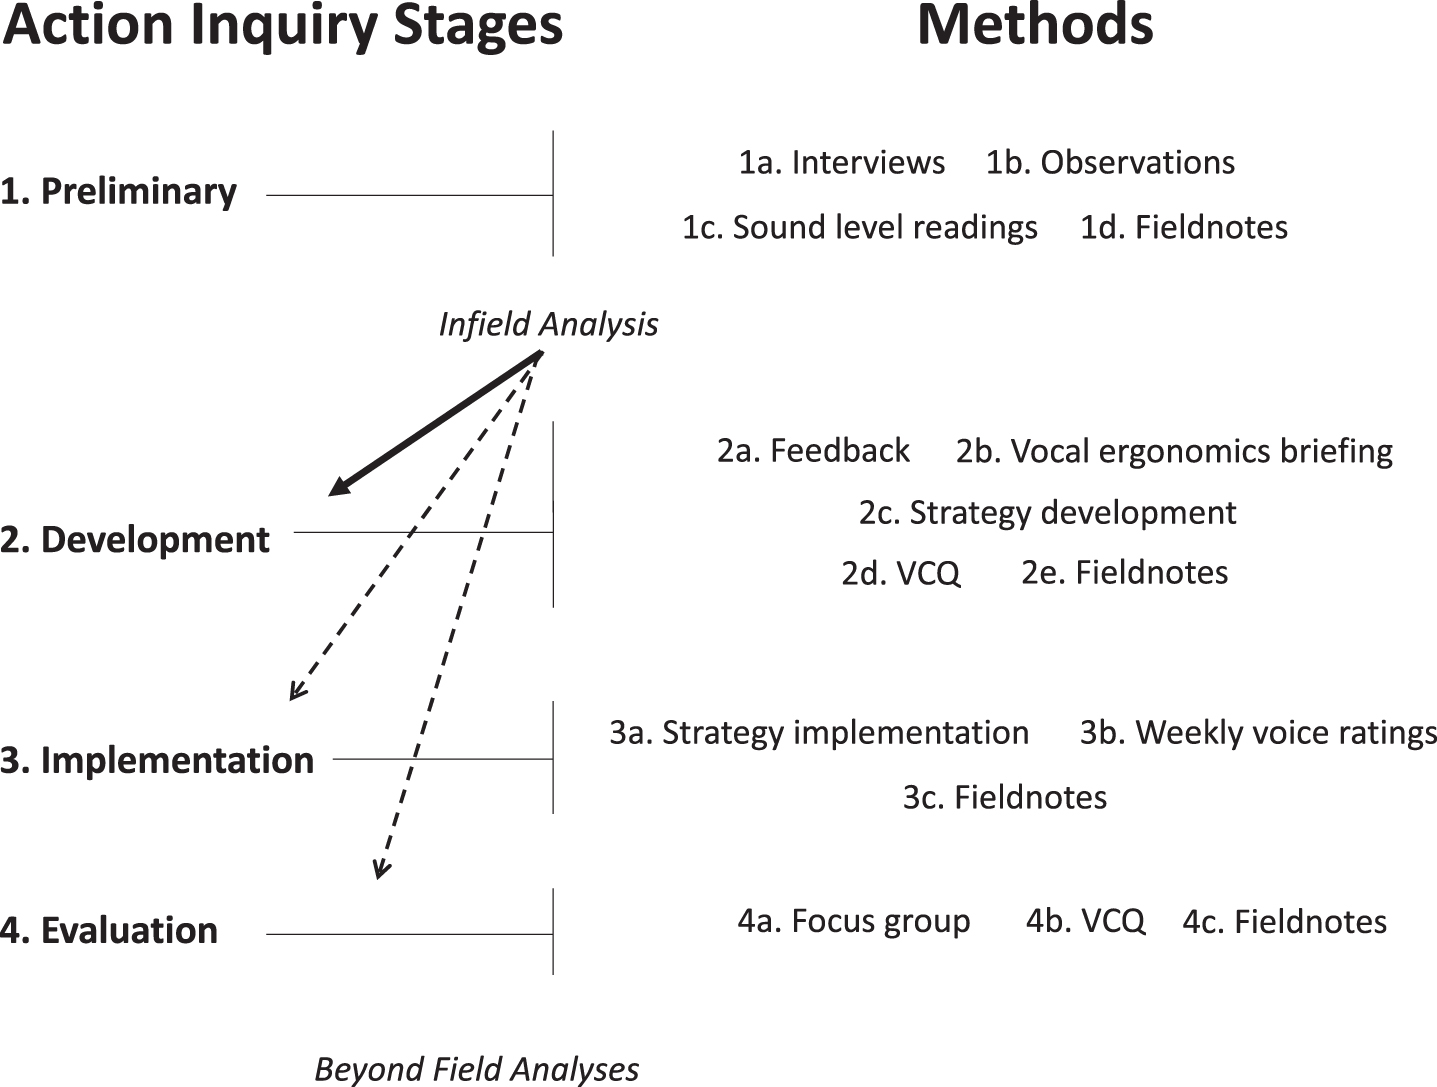 Stages of cooperative action inquiry. Solid, thick line indicates where infield analysis directly facilitated transition from the preliminary stage to development stage. Broken dash lines indicate where infield analysis informed meaning and decision making within and between stages. VCQ = Voice Capabilities Questionnaire [15, 95].